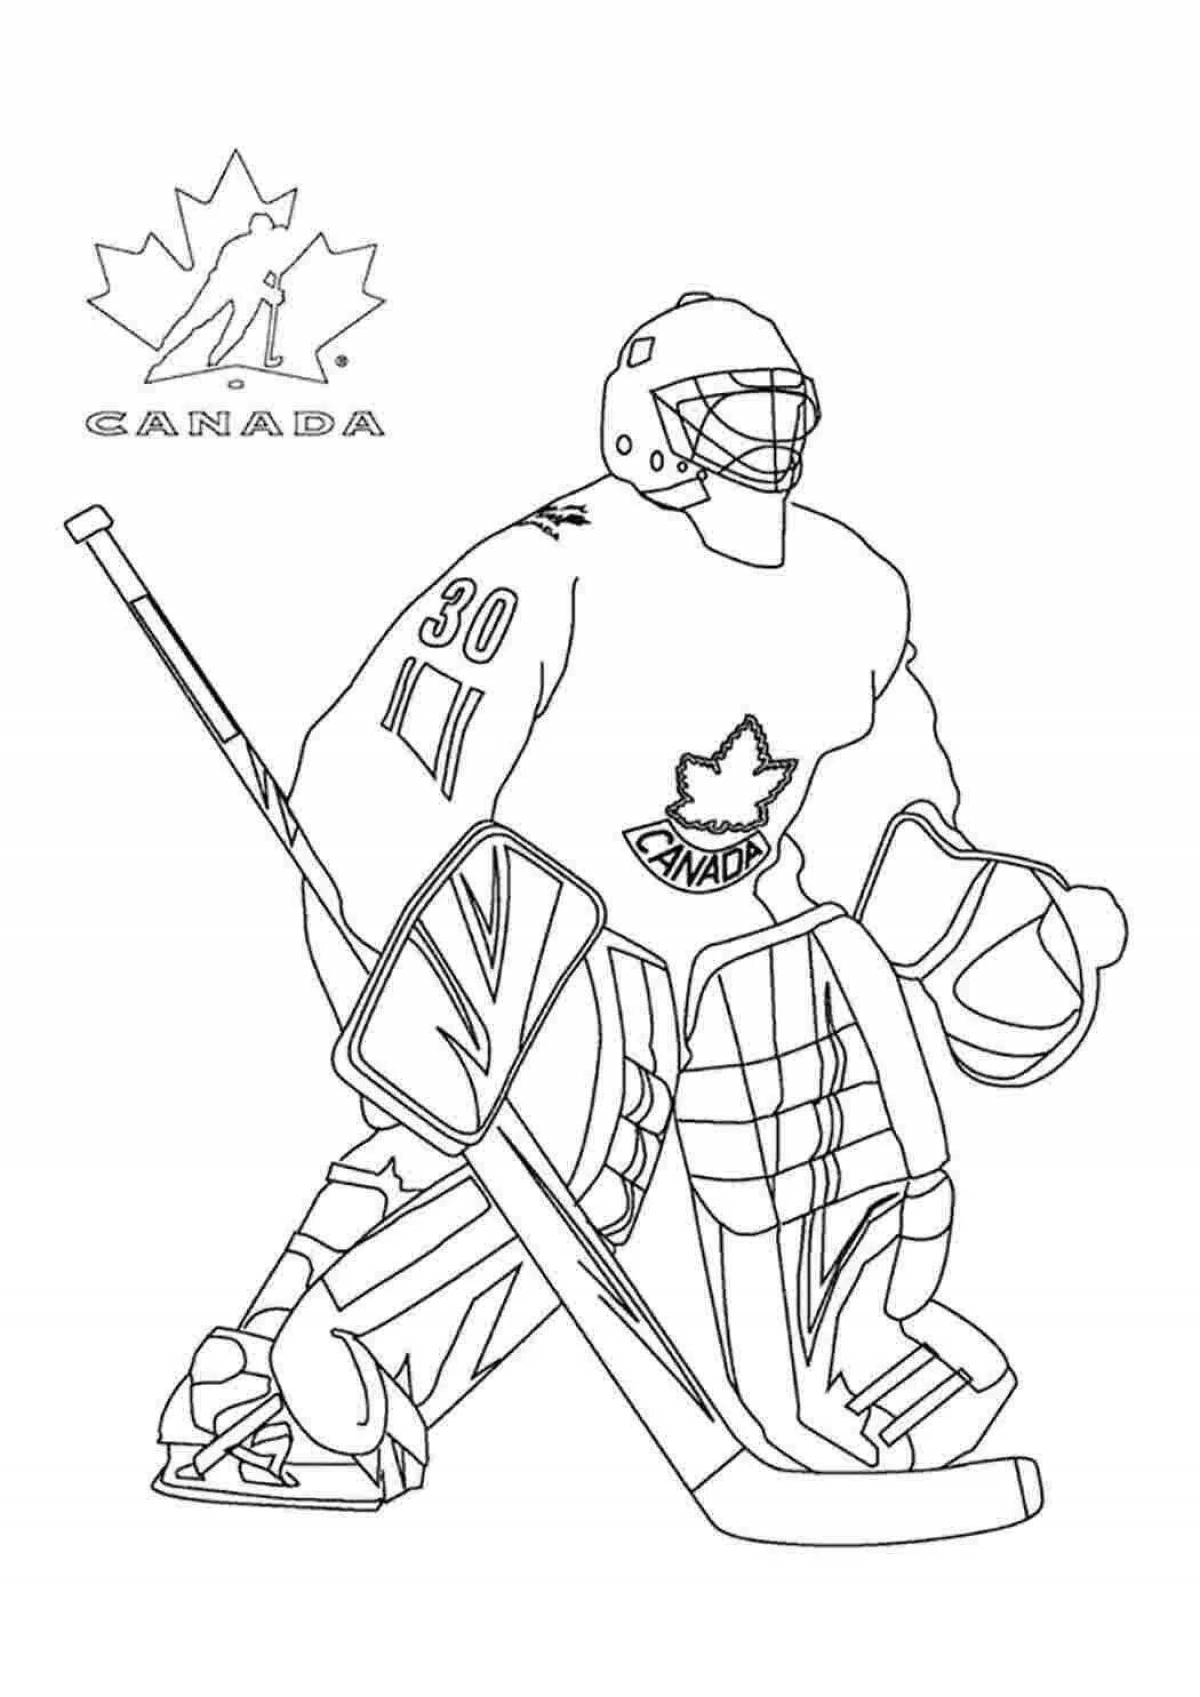 Delightful khl hockey coloring page